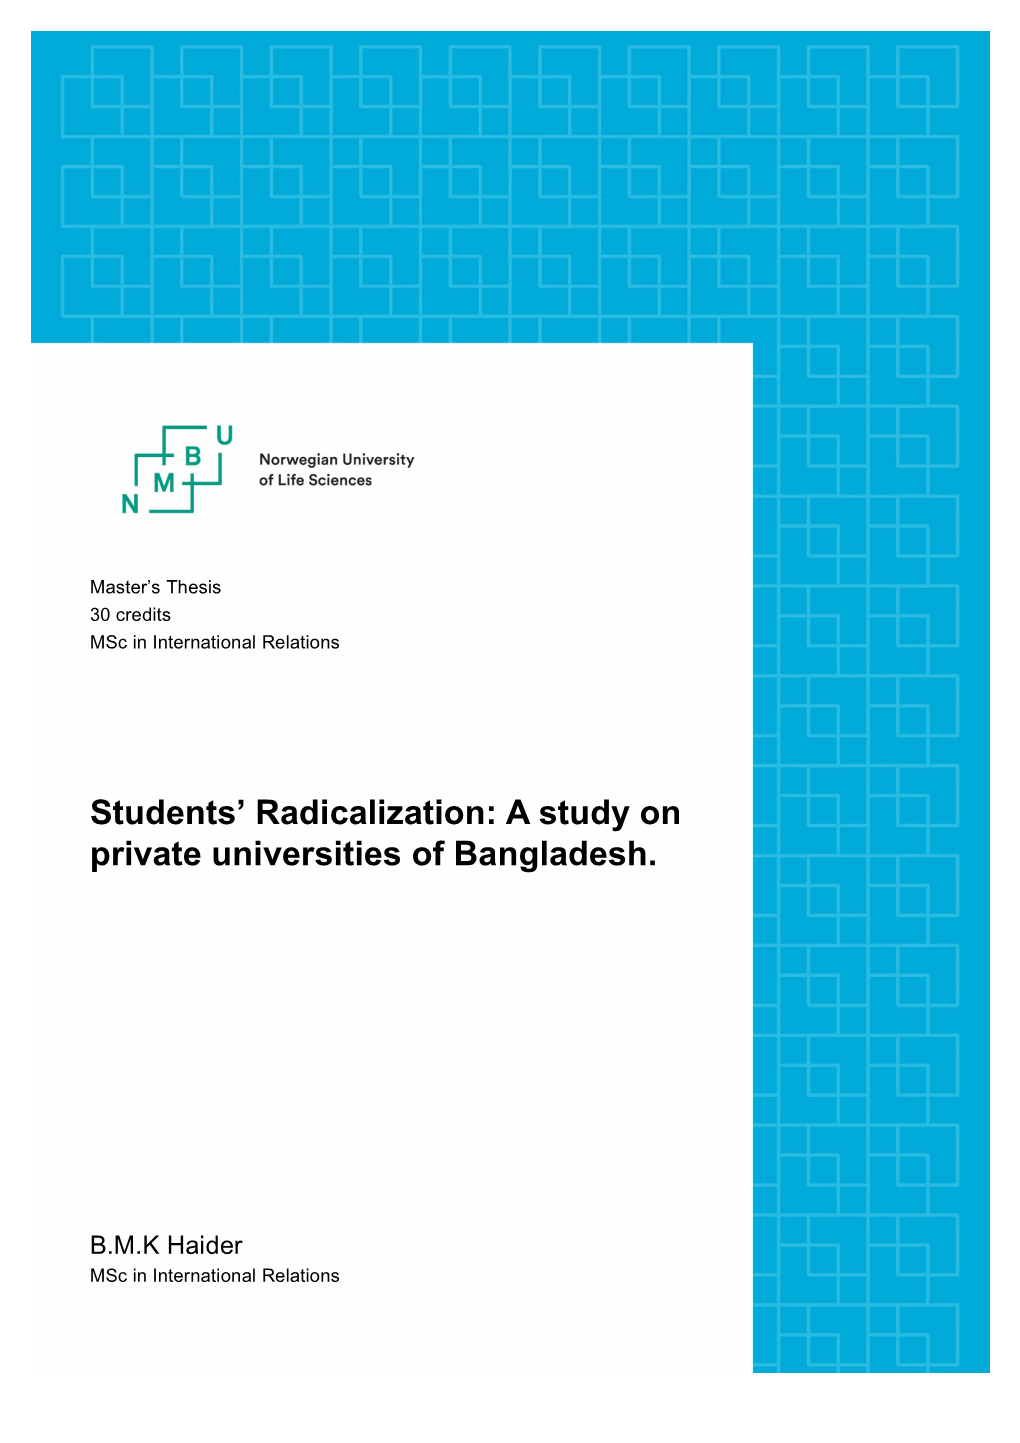 Students' Radicalization: a Study on Private Universities of Bangladesh